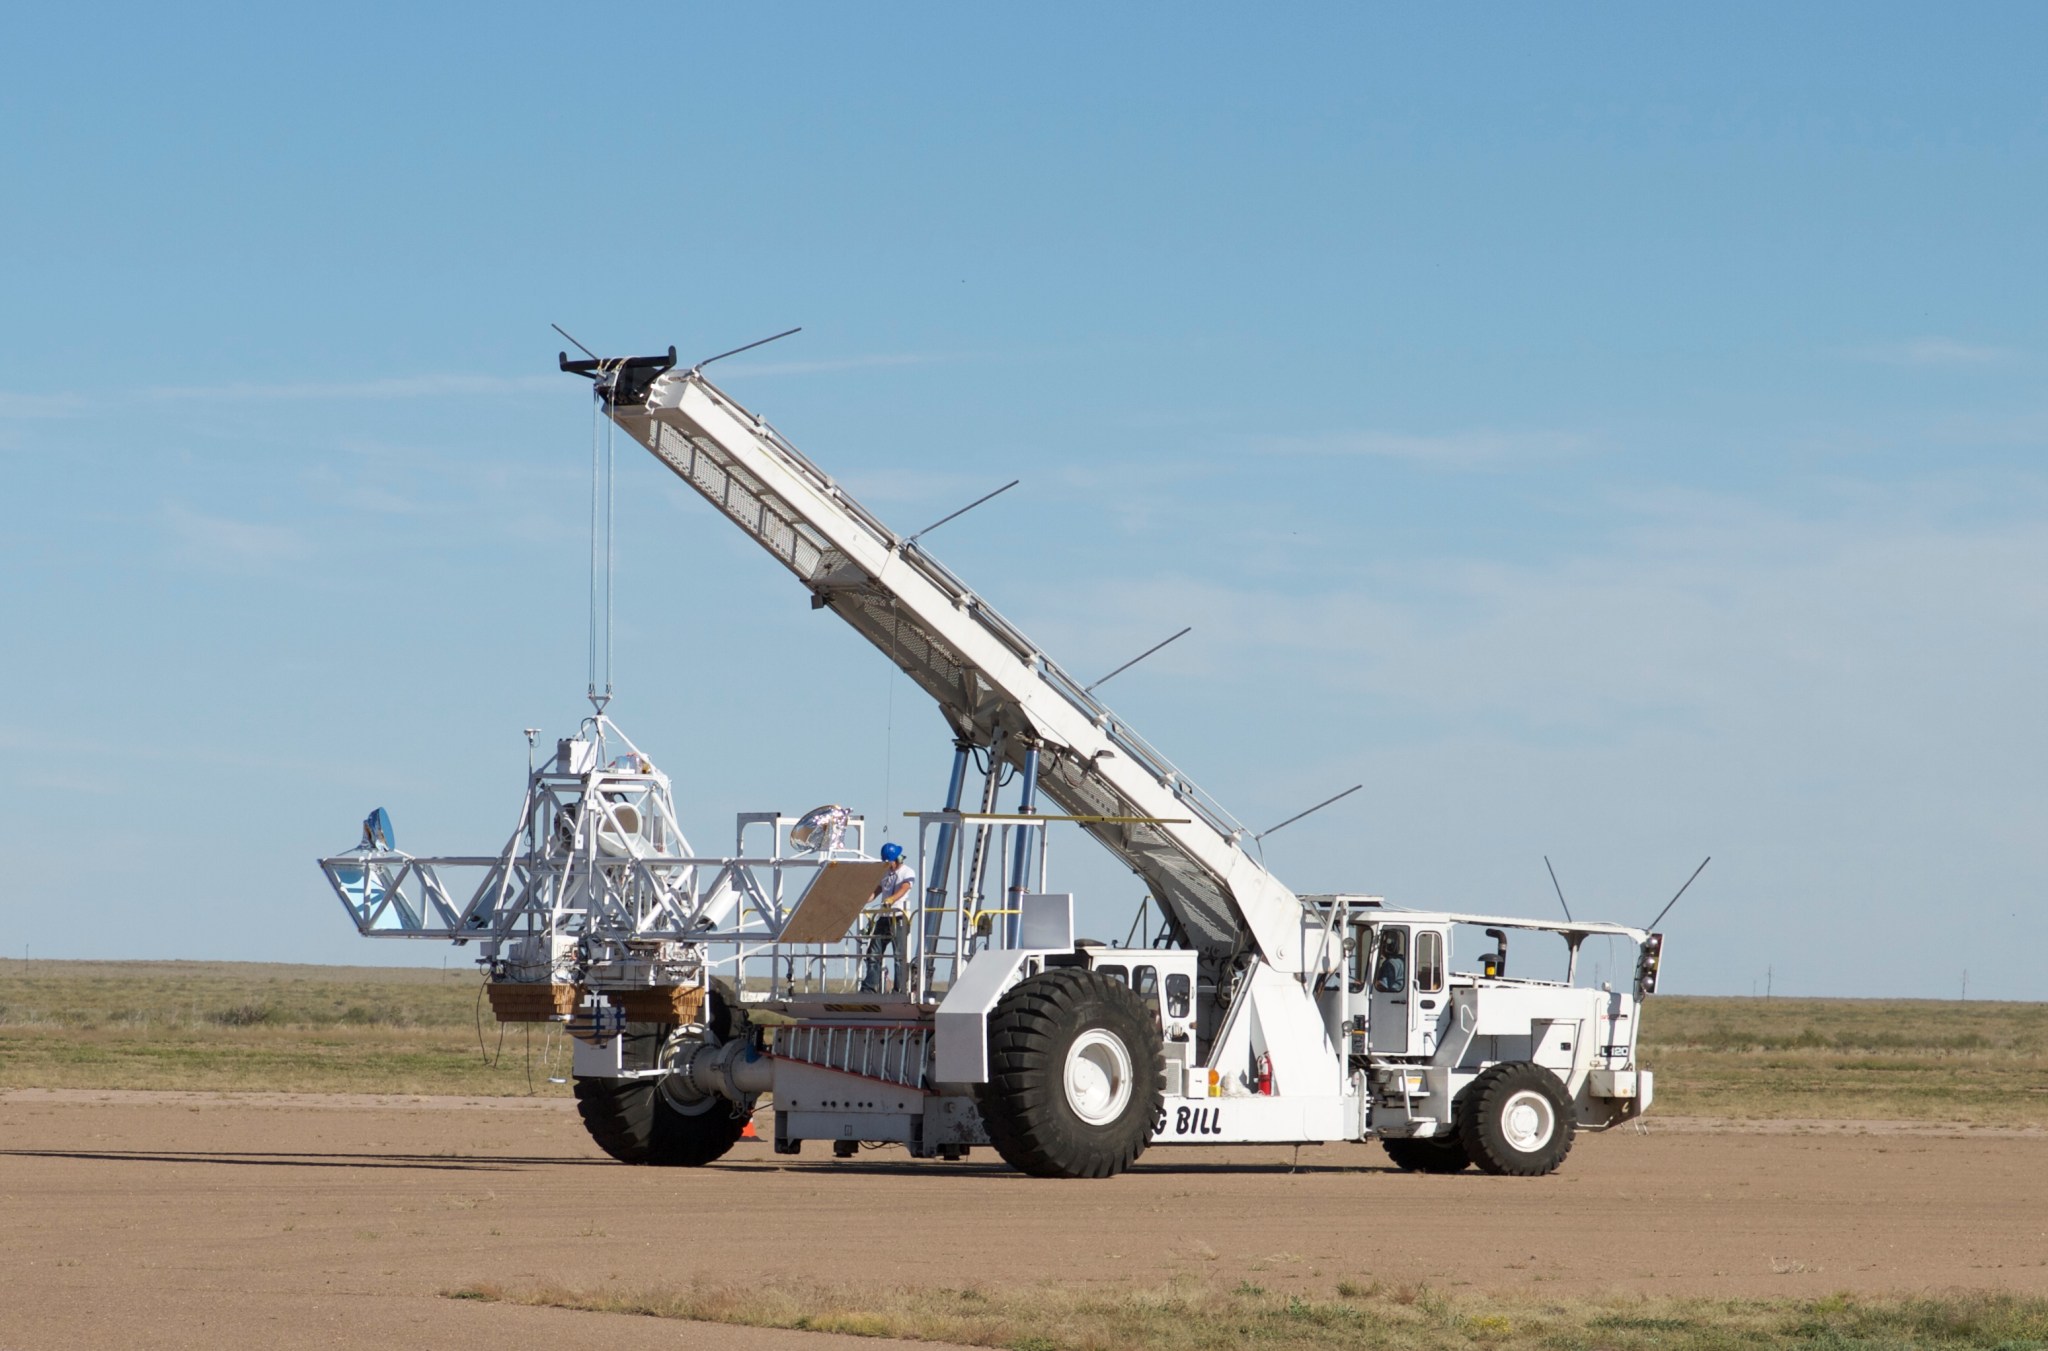 The BETTII payload is held up by a crane as it's driven across a dusty landscape.